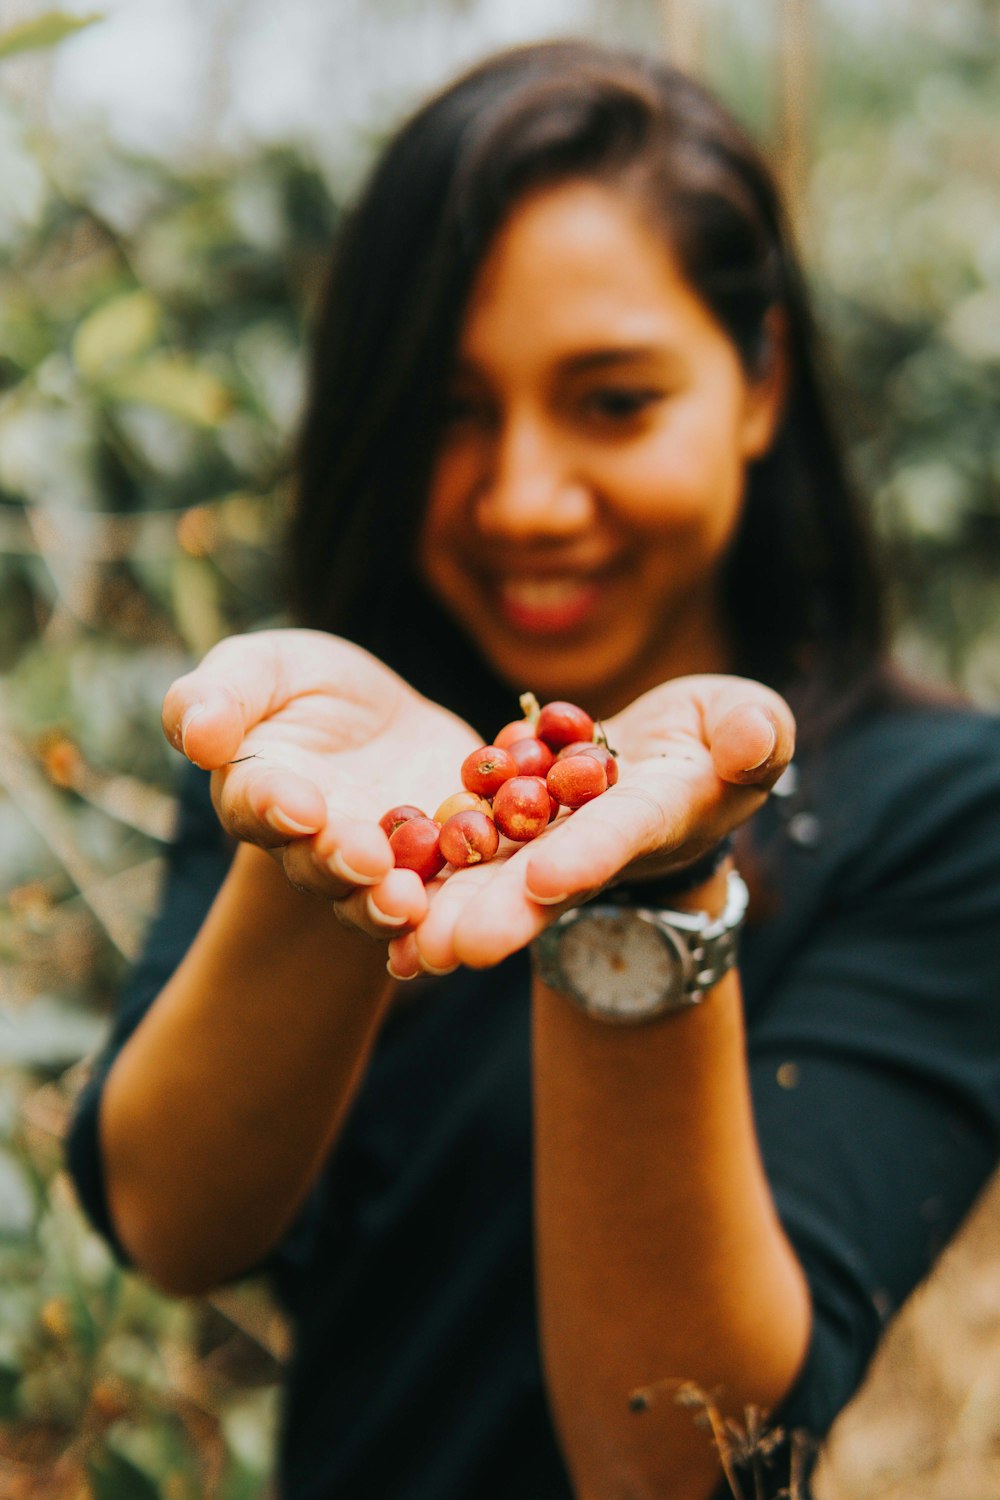 woman holding red round fruits